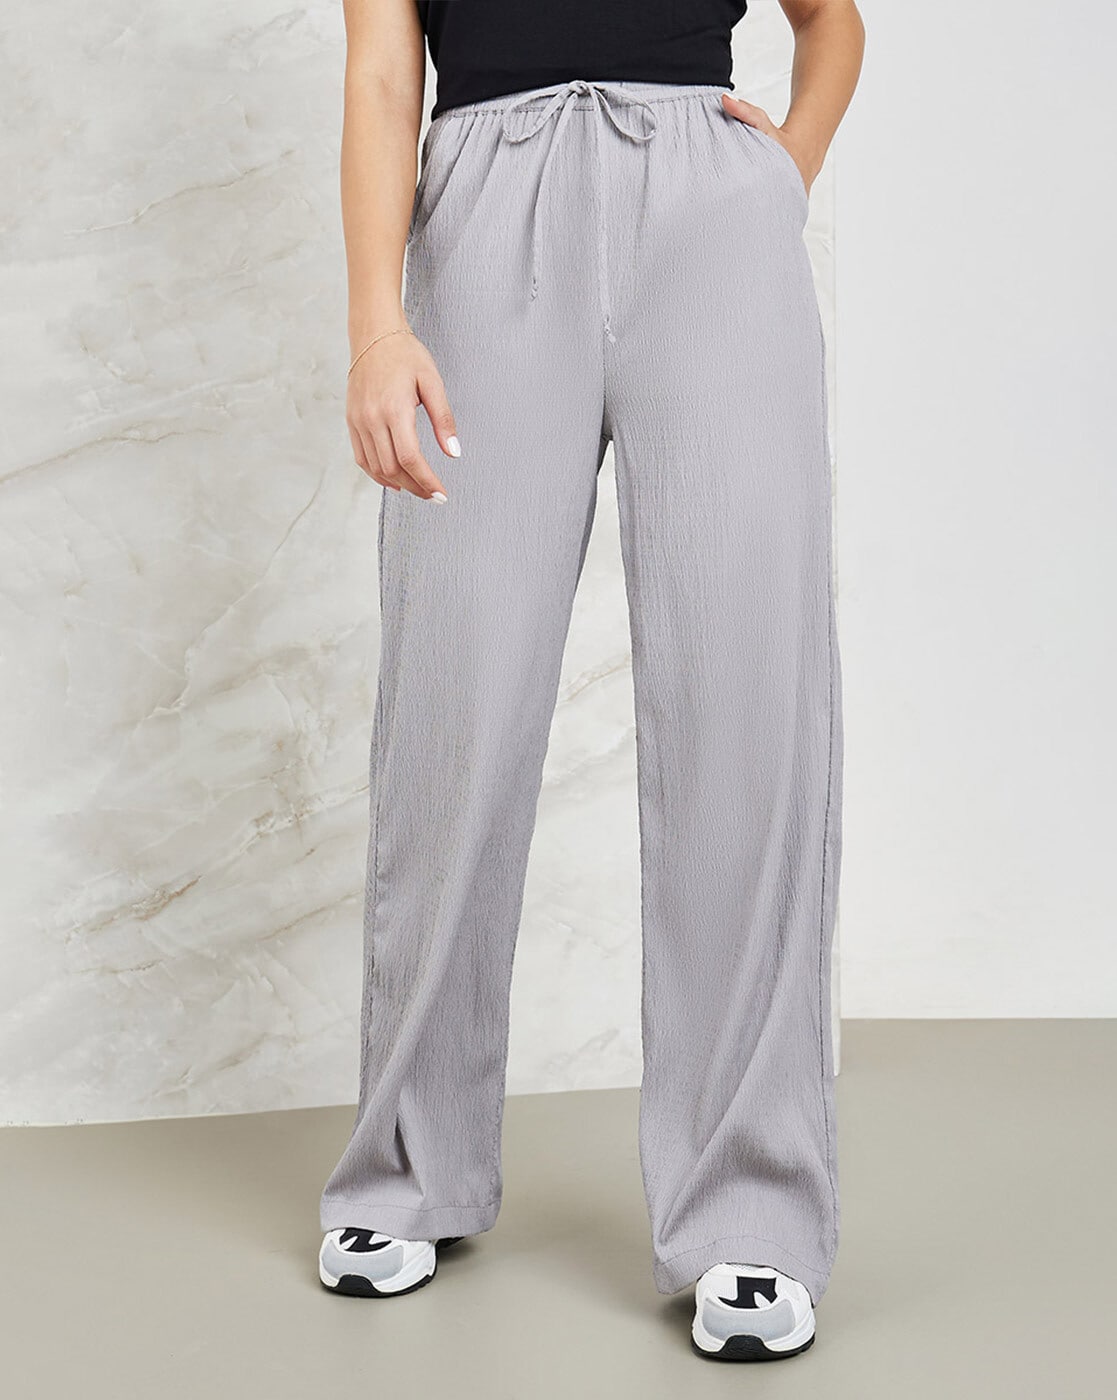 Chic Office Pants - Grey Trouser Pants - High Waisted Pants - Lulus